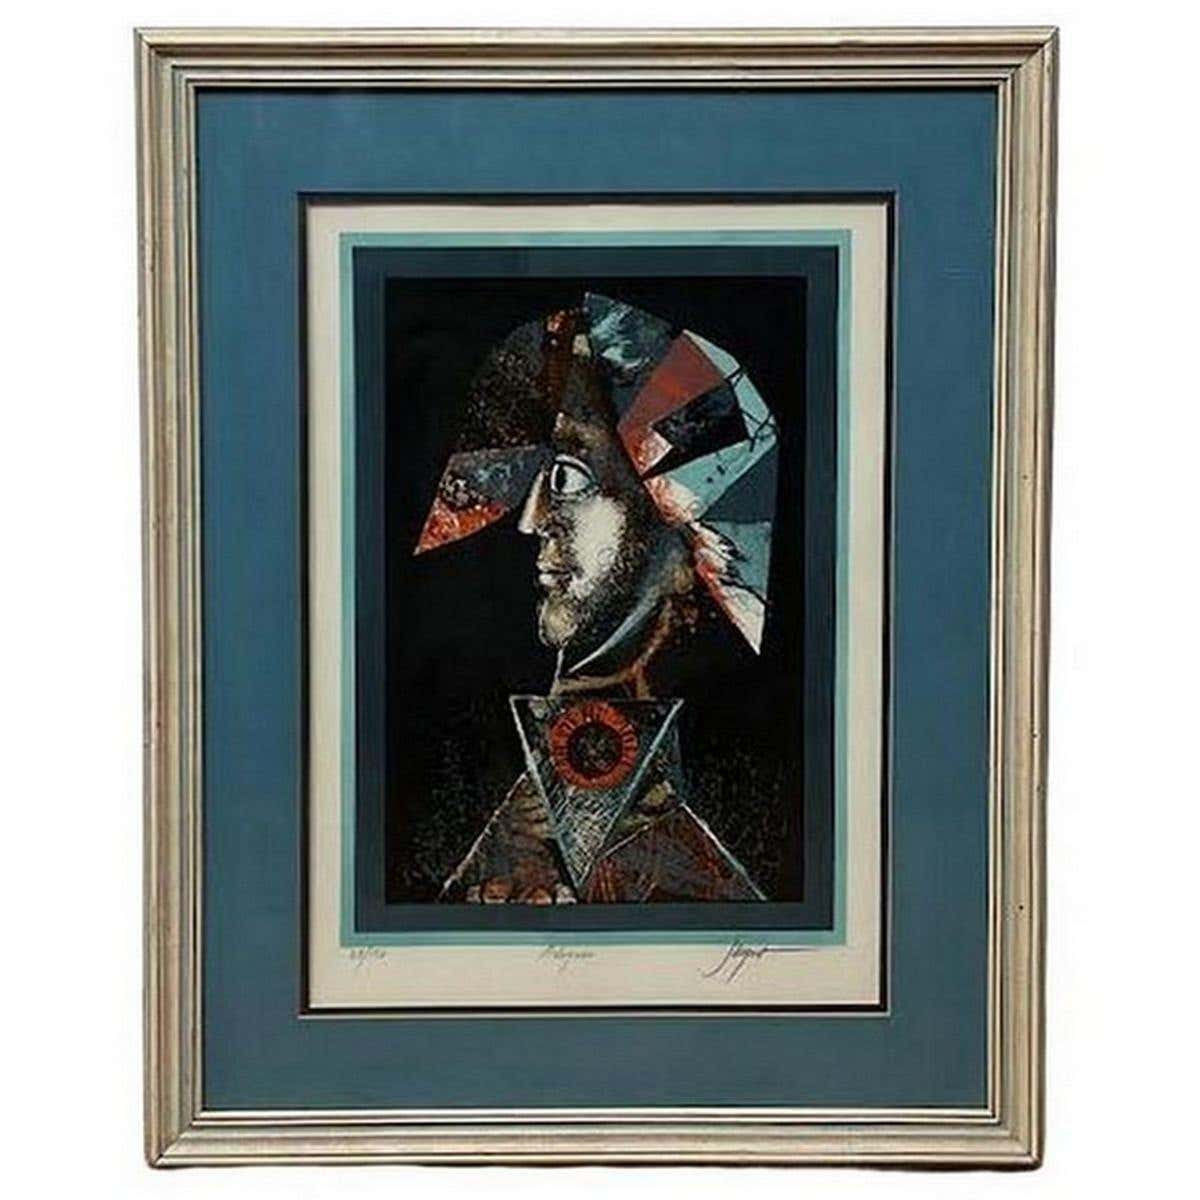 Arlequin Portrait Lithograph By Pierre Jacquot in Gold Frame